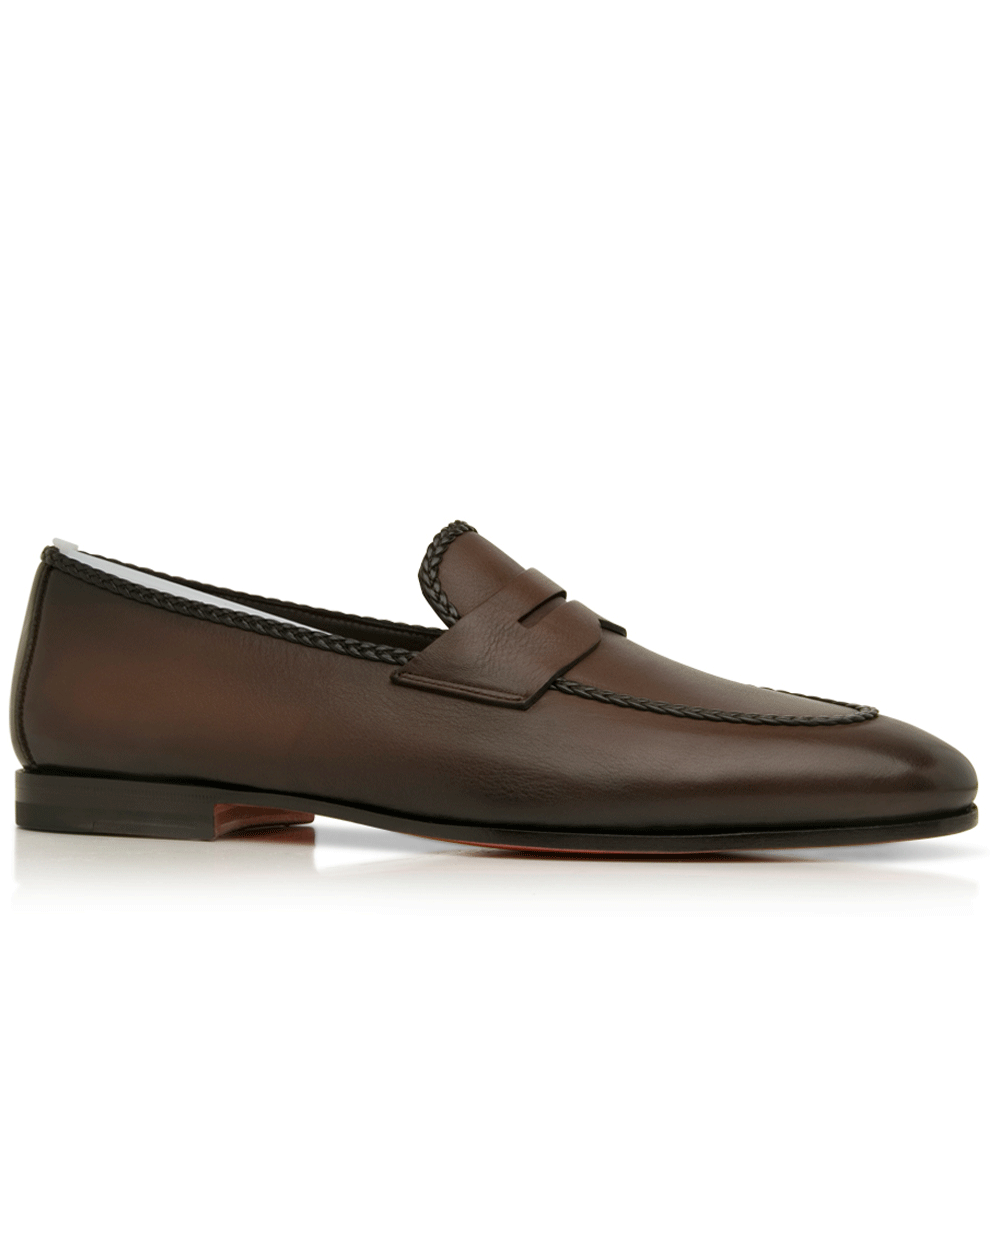 Braided Penny Loafer in Dark Brown